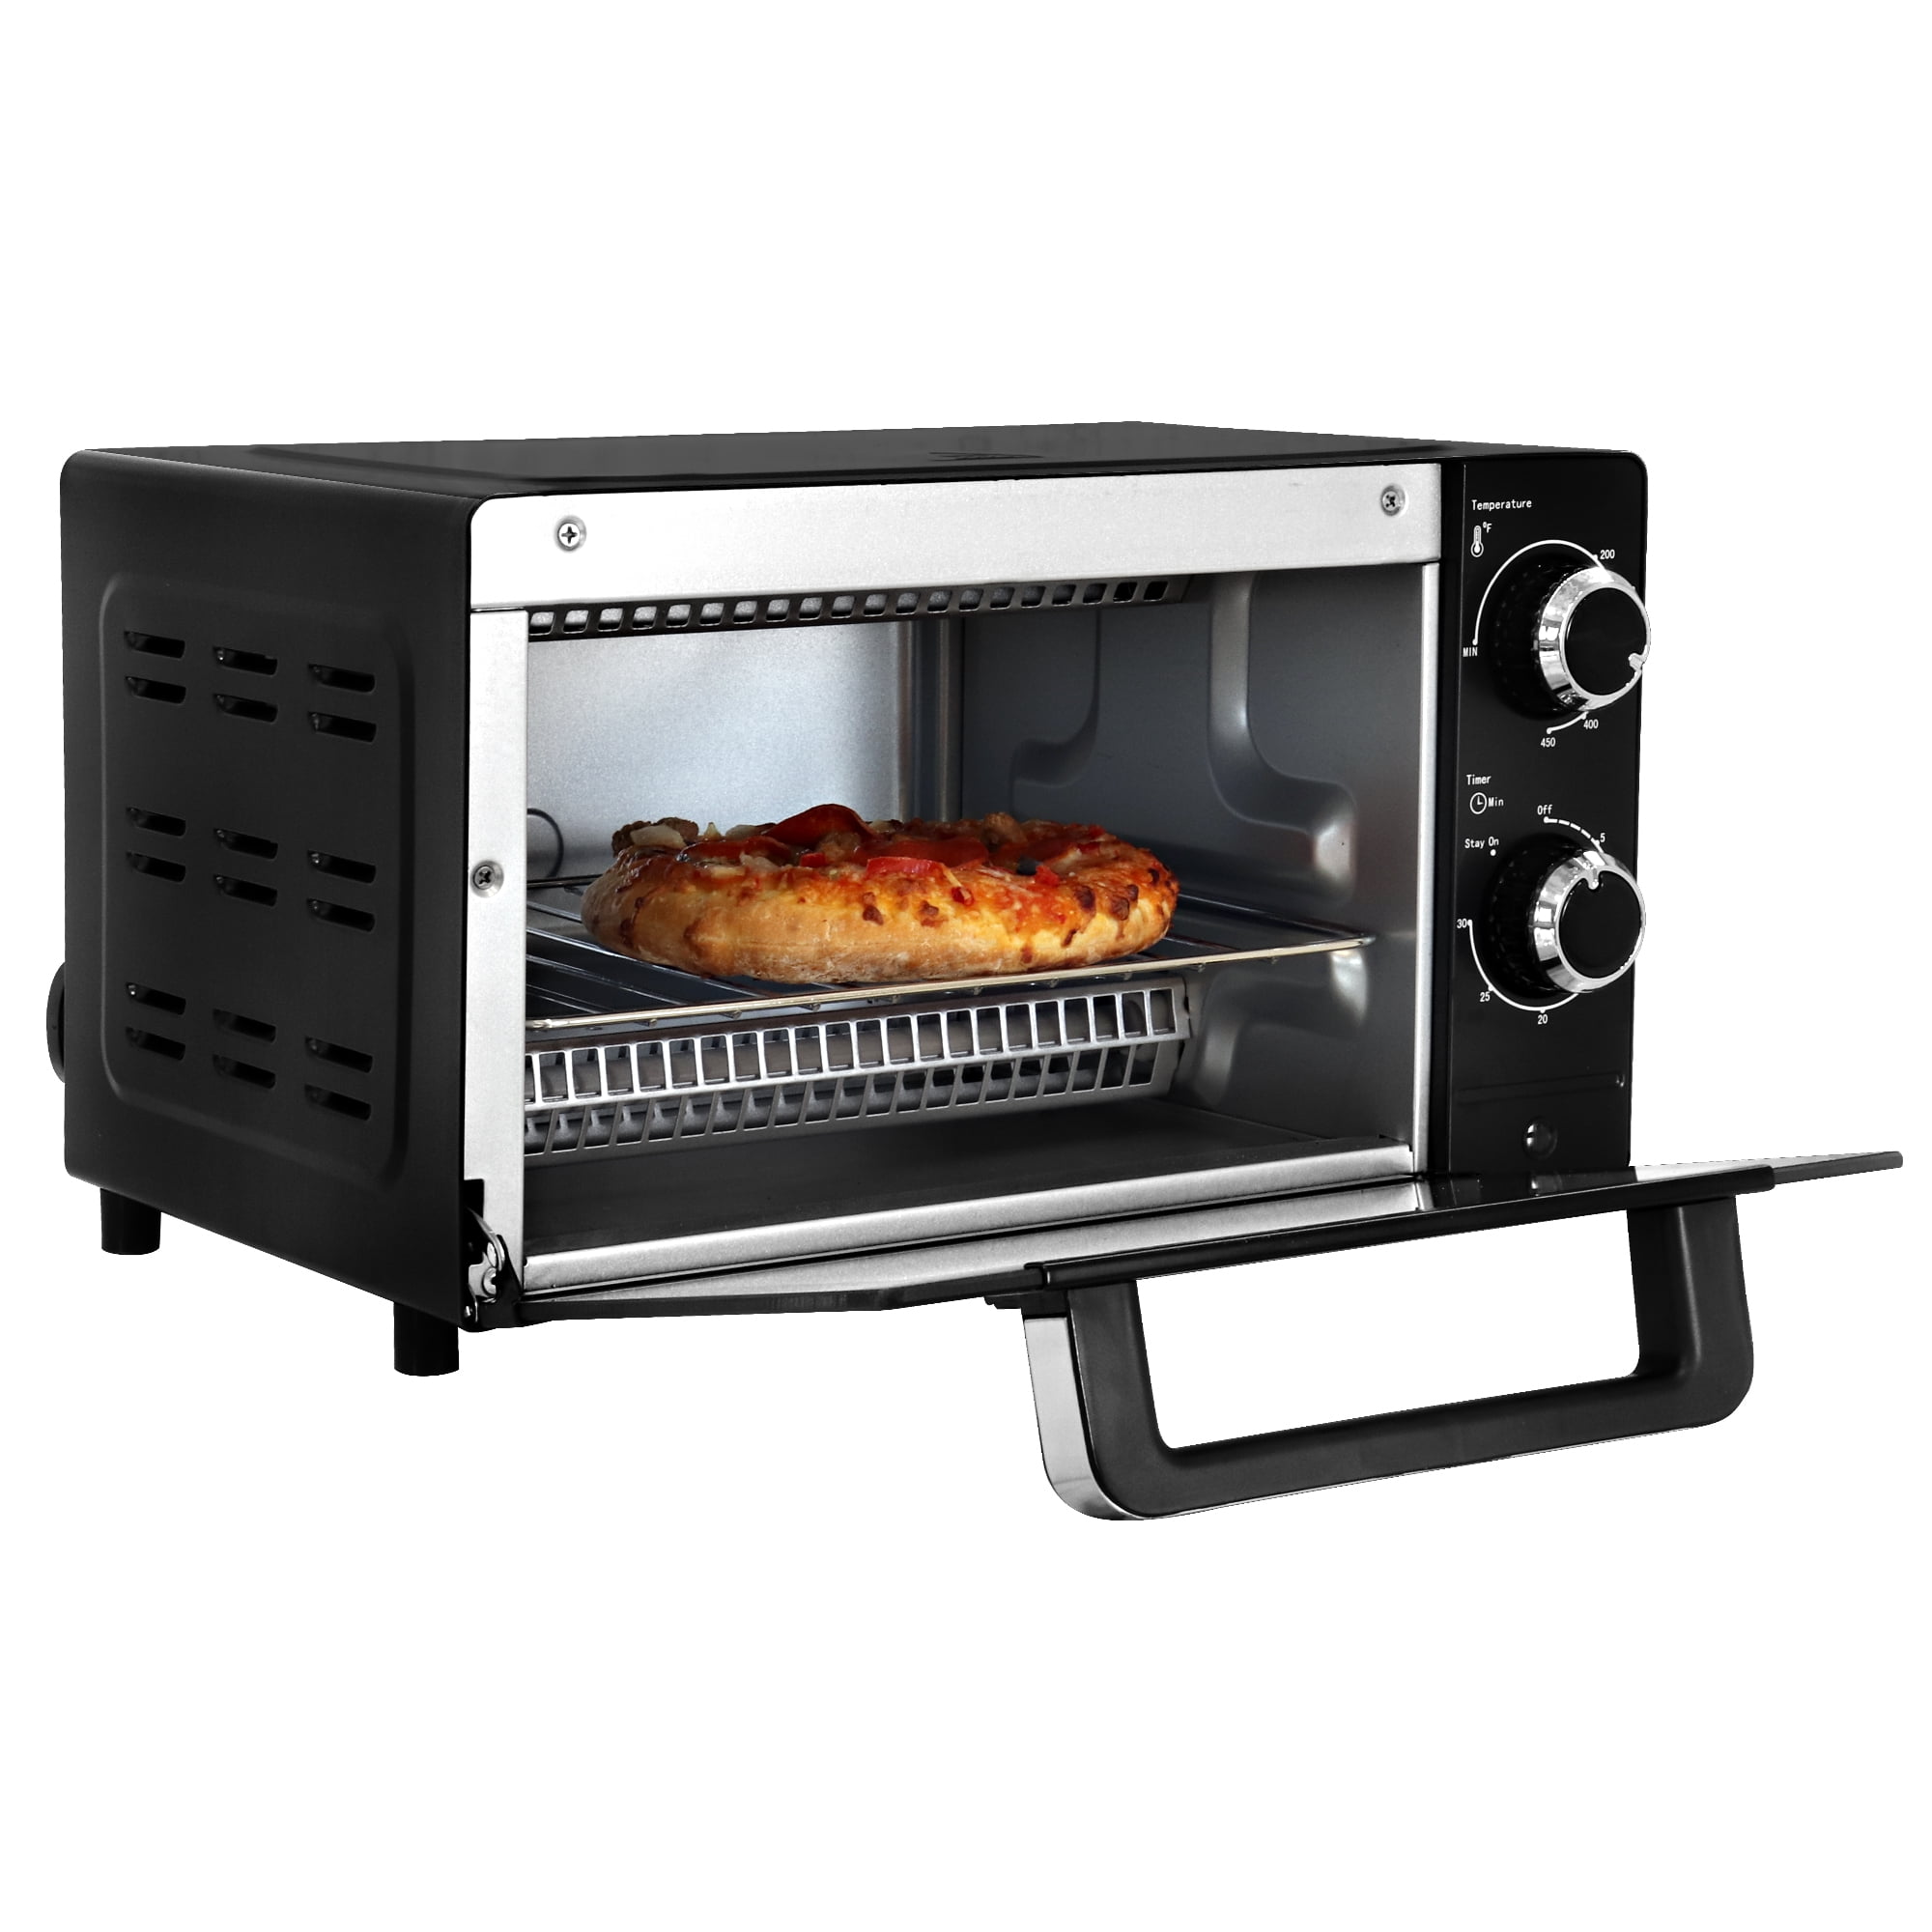 Dash Express Countertop Toaster Oven with Quartz Technology, Bake, Broil, and Toast with 4 Slice Capacity and Pizza Capability - Black